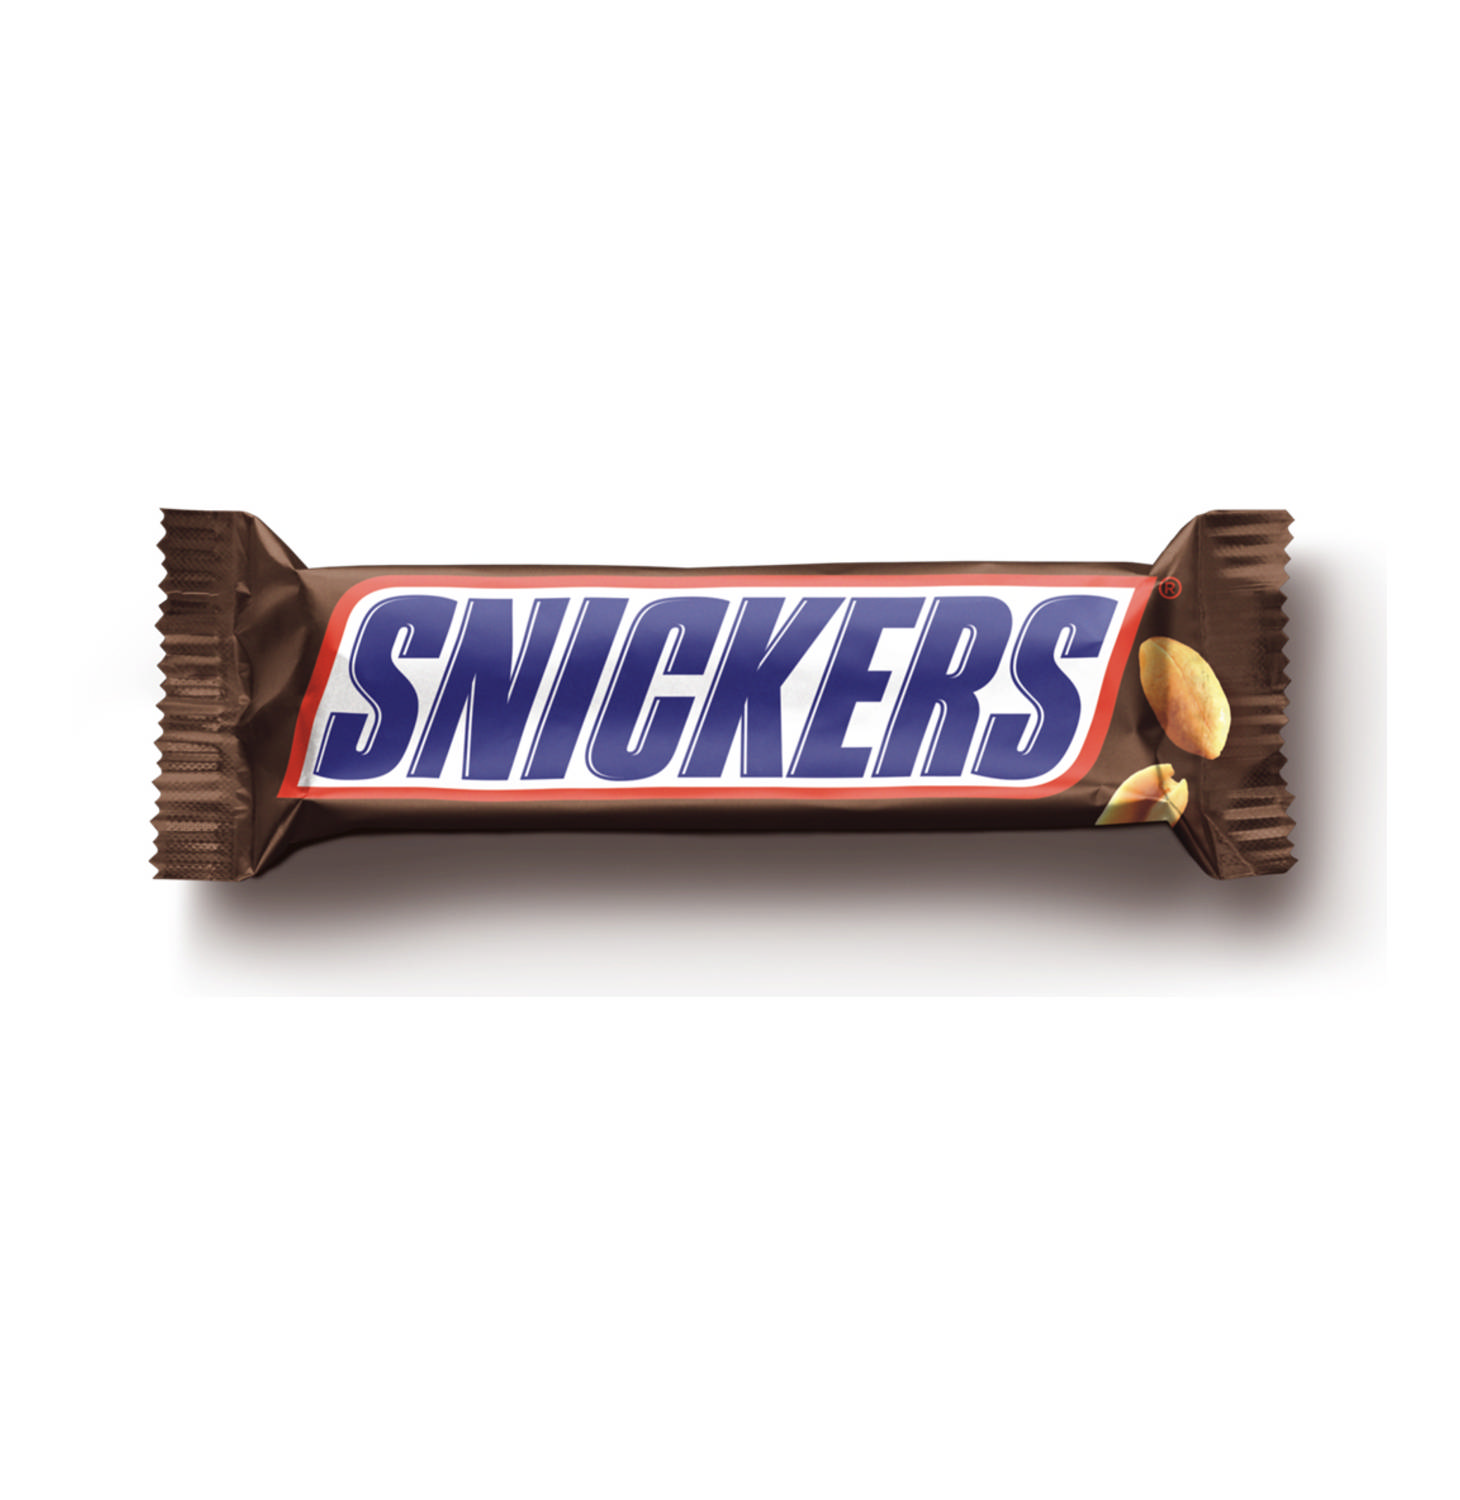 MAKRO Snickers Chocolate Bar (4 x 80g) - Lowest Prices & Specials ...